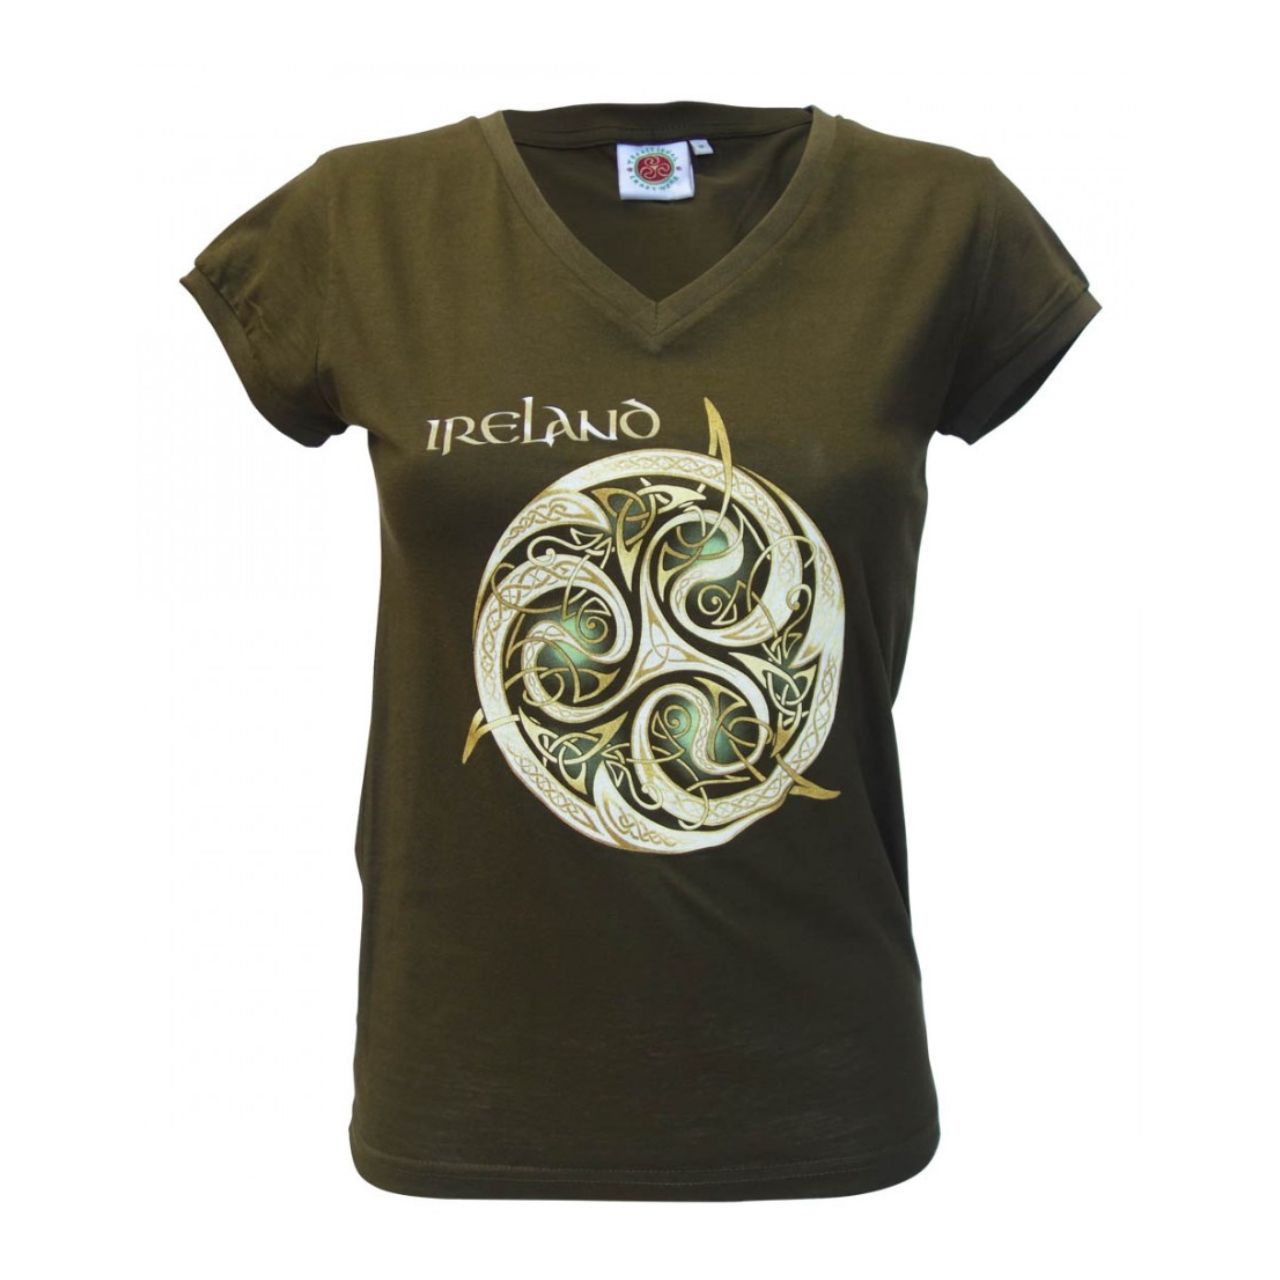 Khaki Celtic Knot V-Neck Ladies T-Shirt  Khaki ladies V-neck cotton T-shirt is a part of the Traditional Craft Official Collection. It is a fitted style and the cream and gold Celtic knot is designed in a gradient print making this a unique style T-shirt.